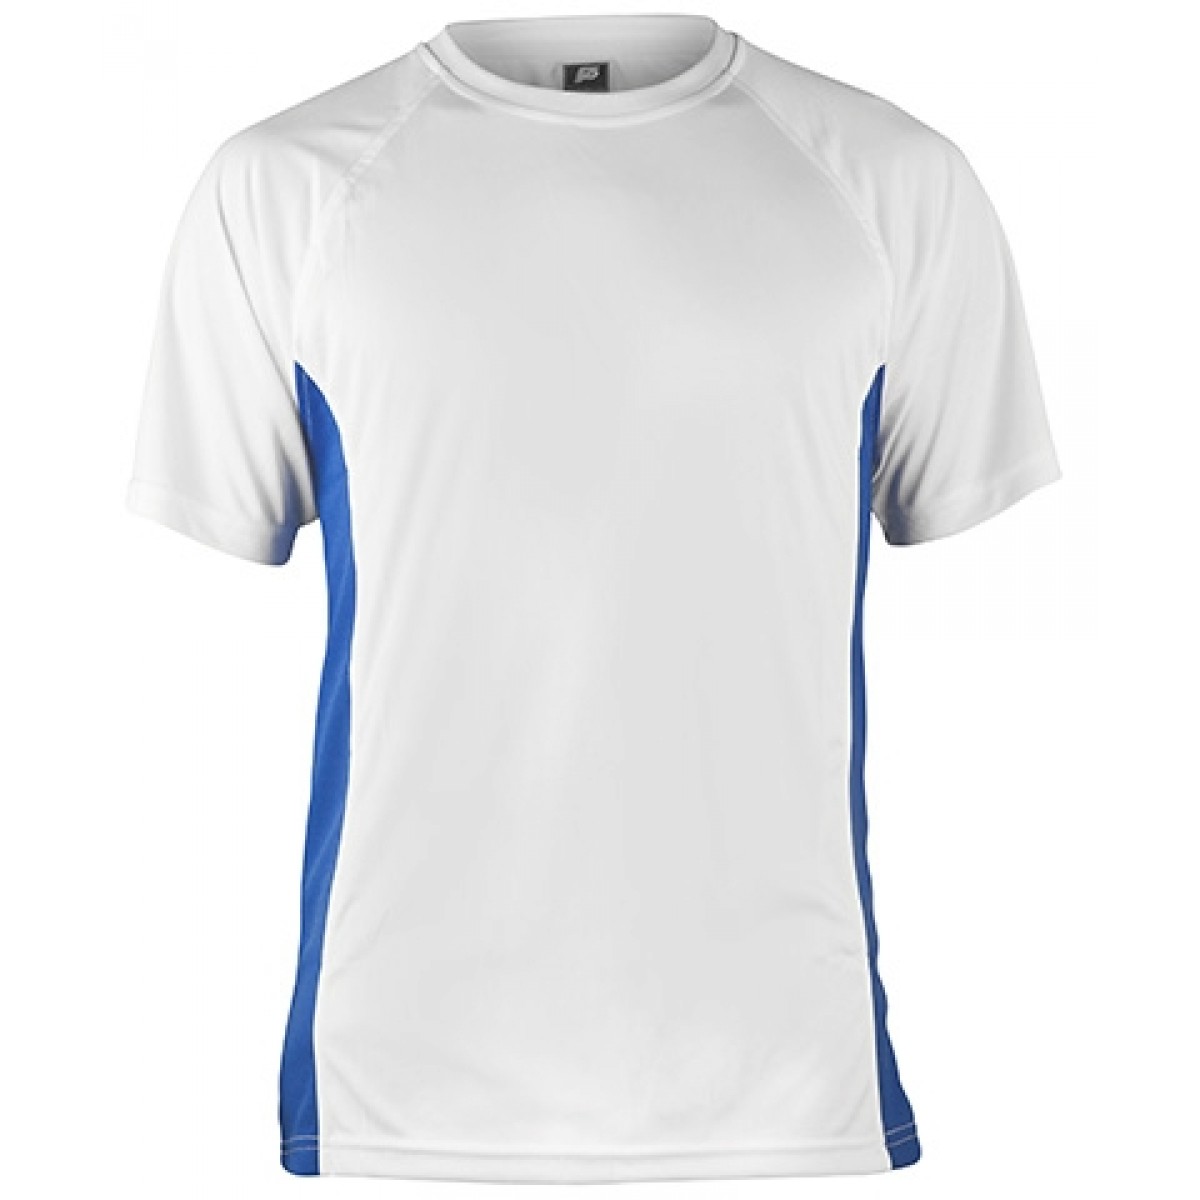 Short Sleeve White Performance With Blue Side Insert-White/Blue-YS